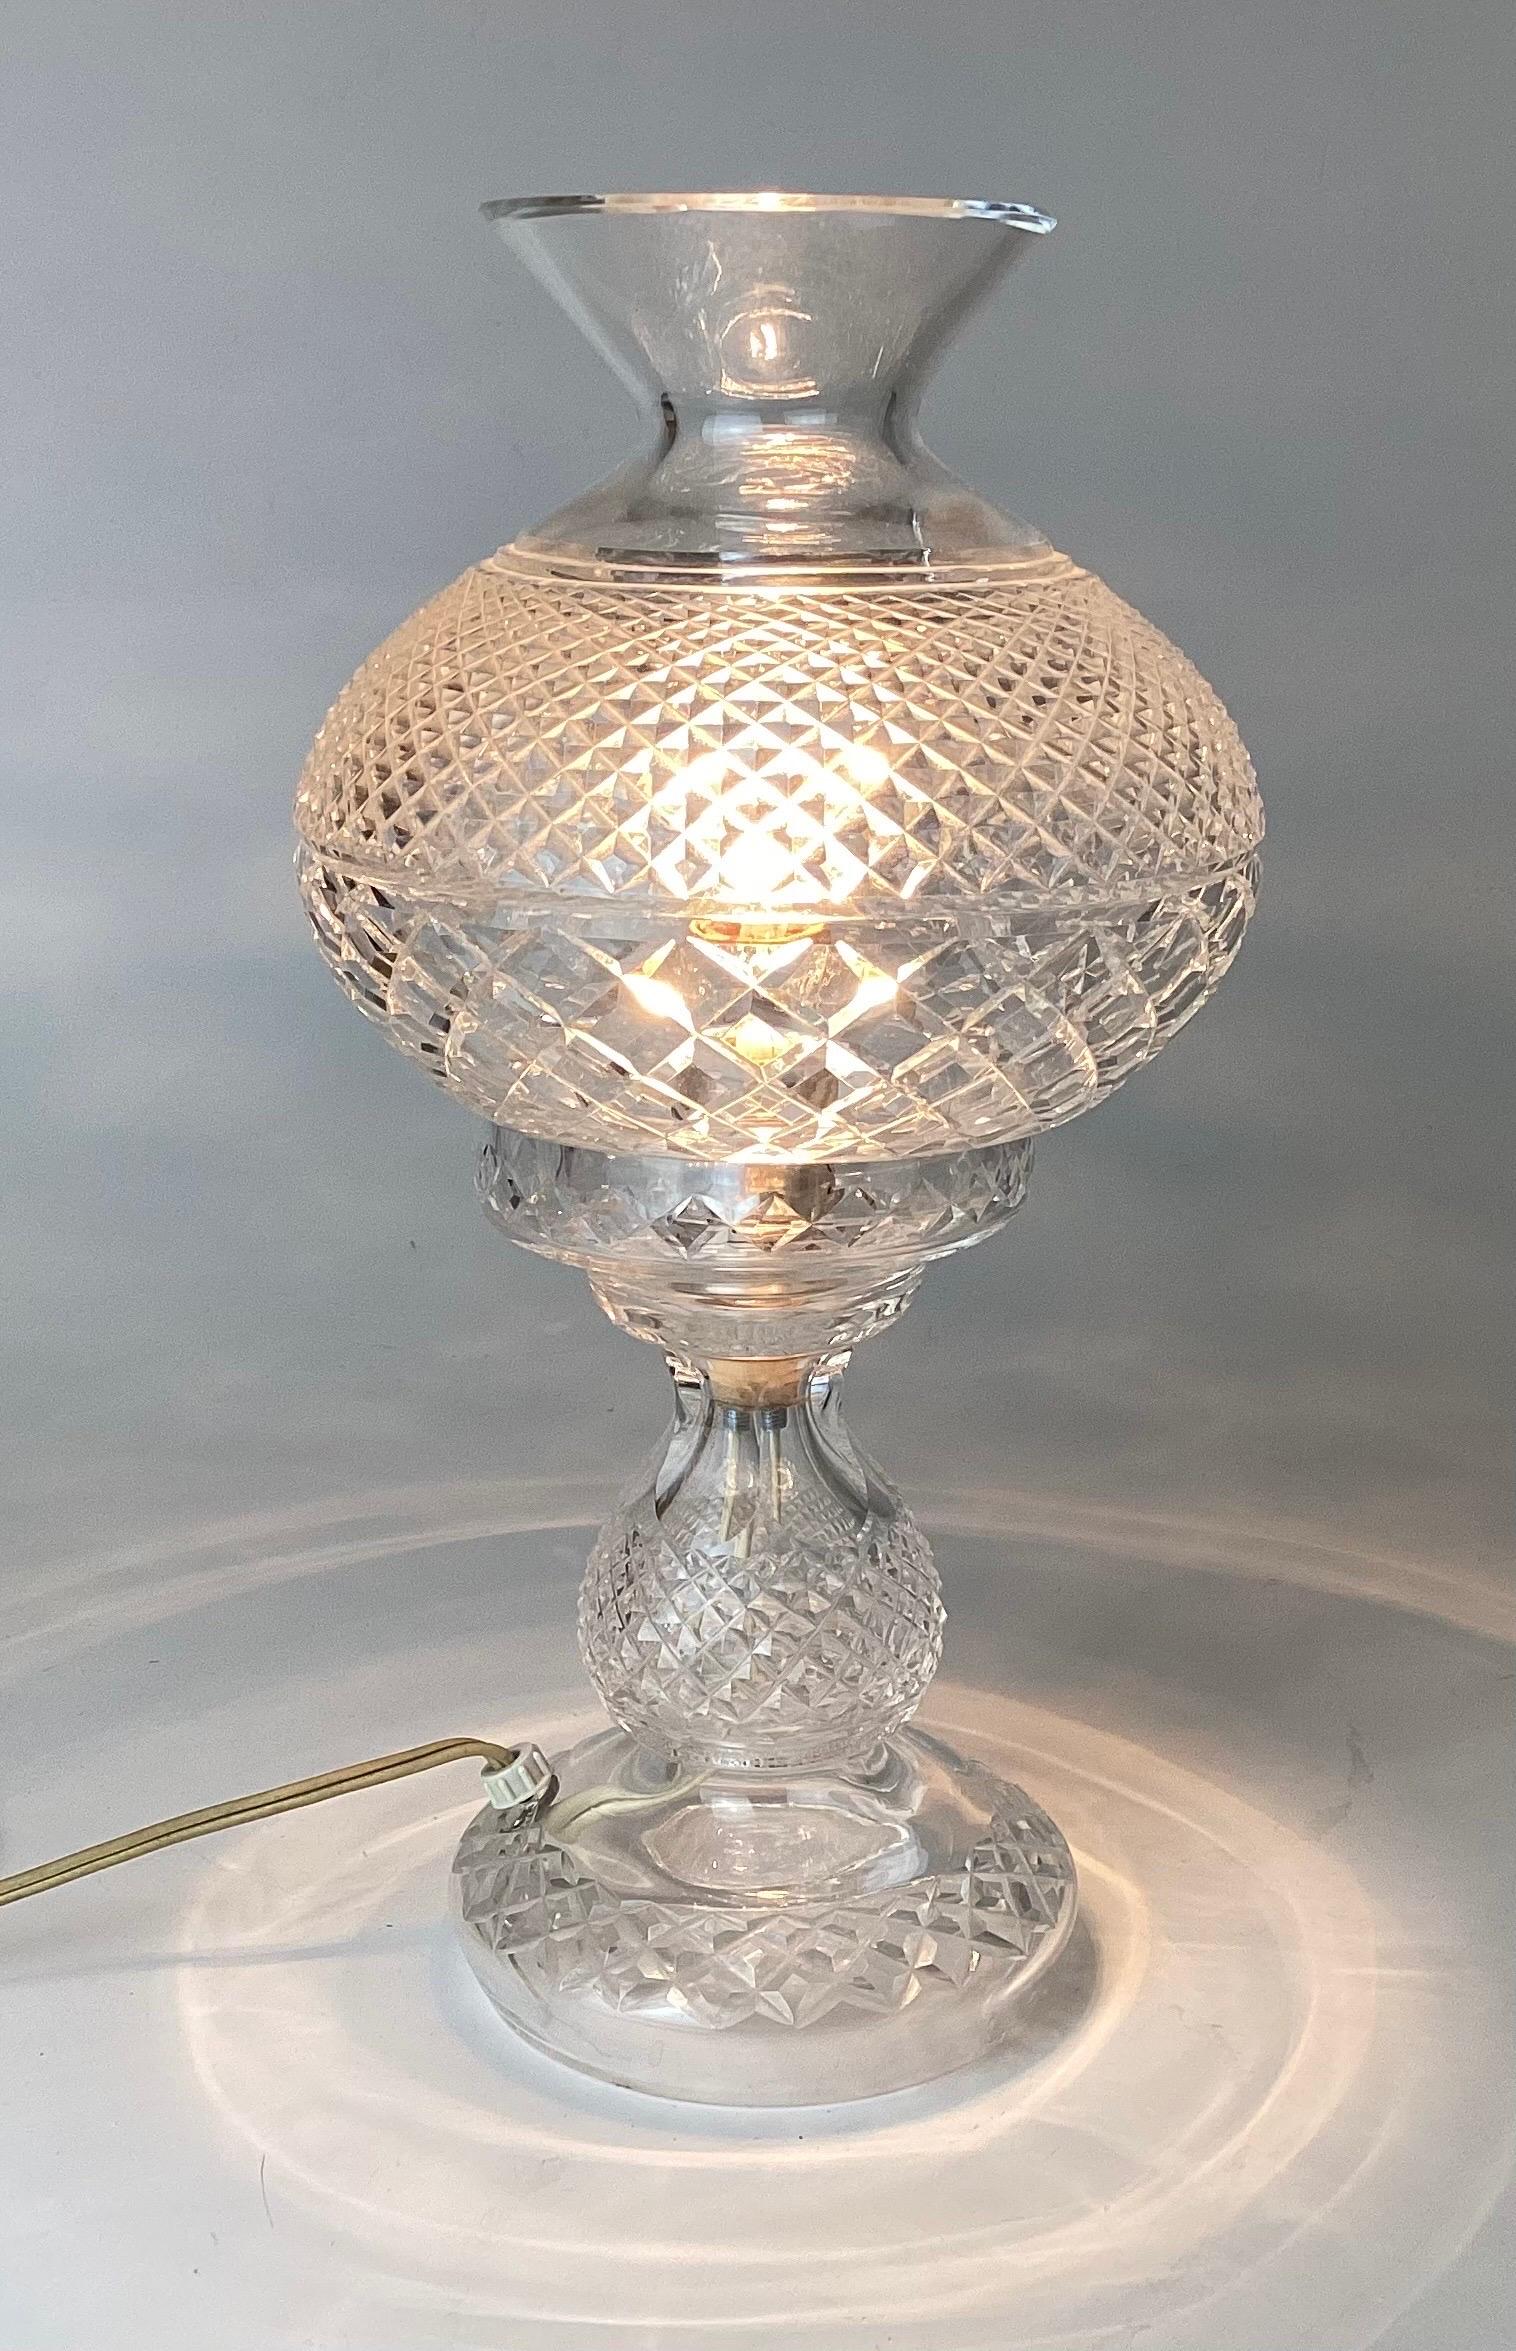 Waterford crystal Inishmore hurricane table lamp. Measure 14